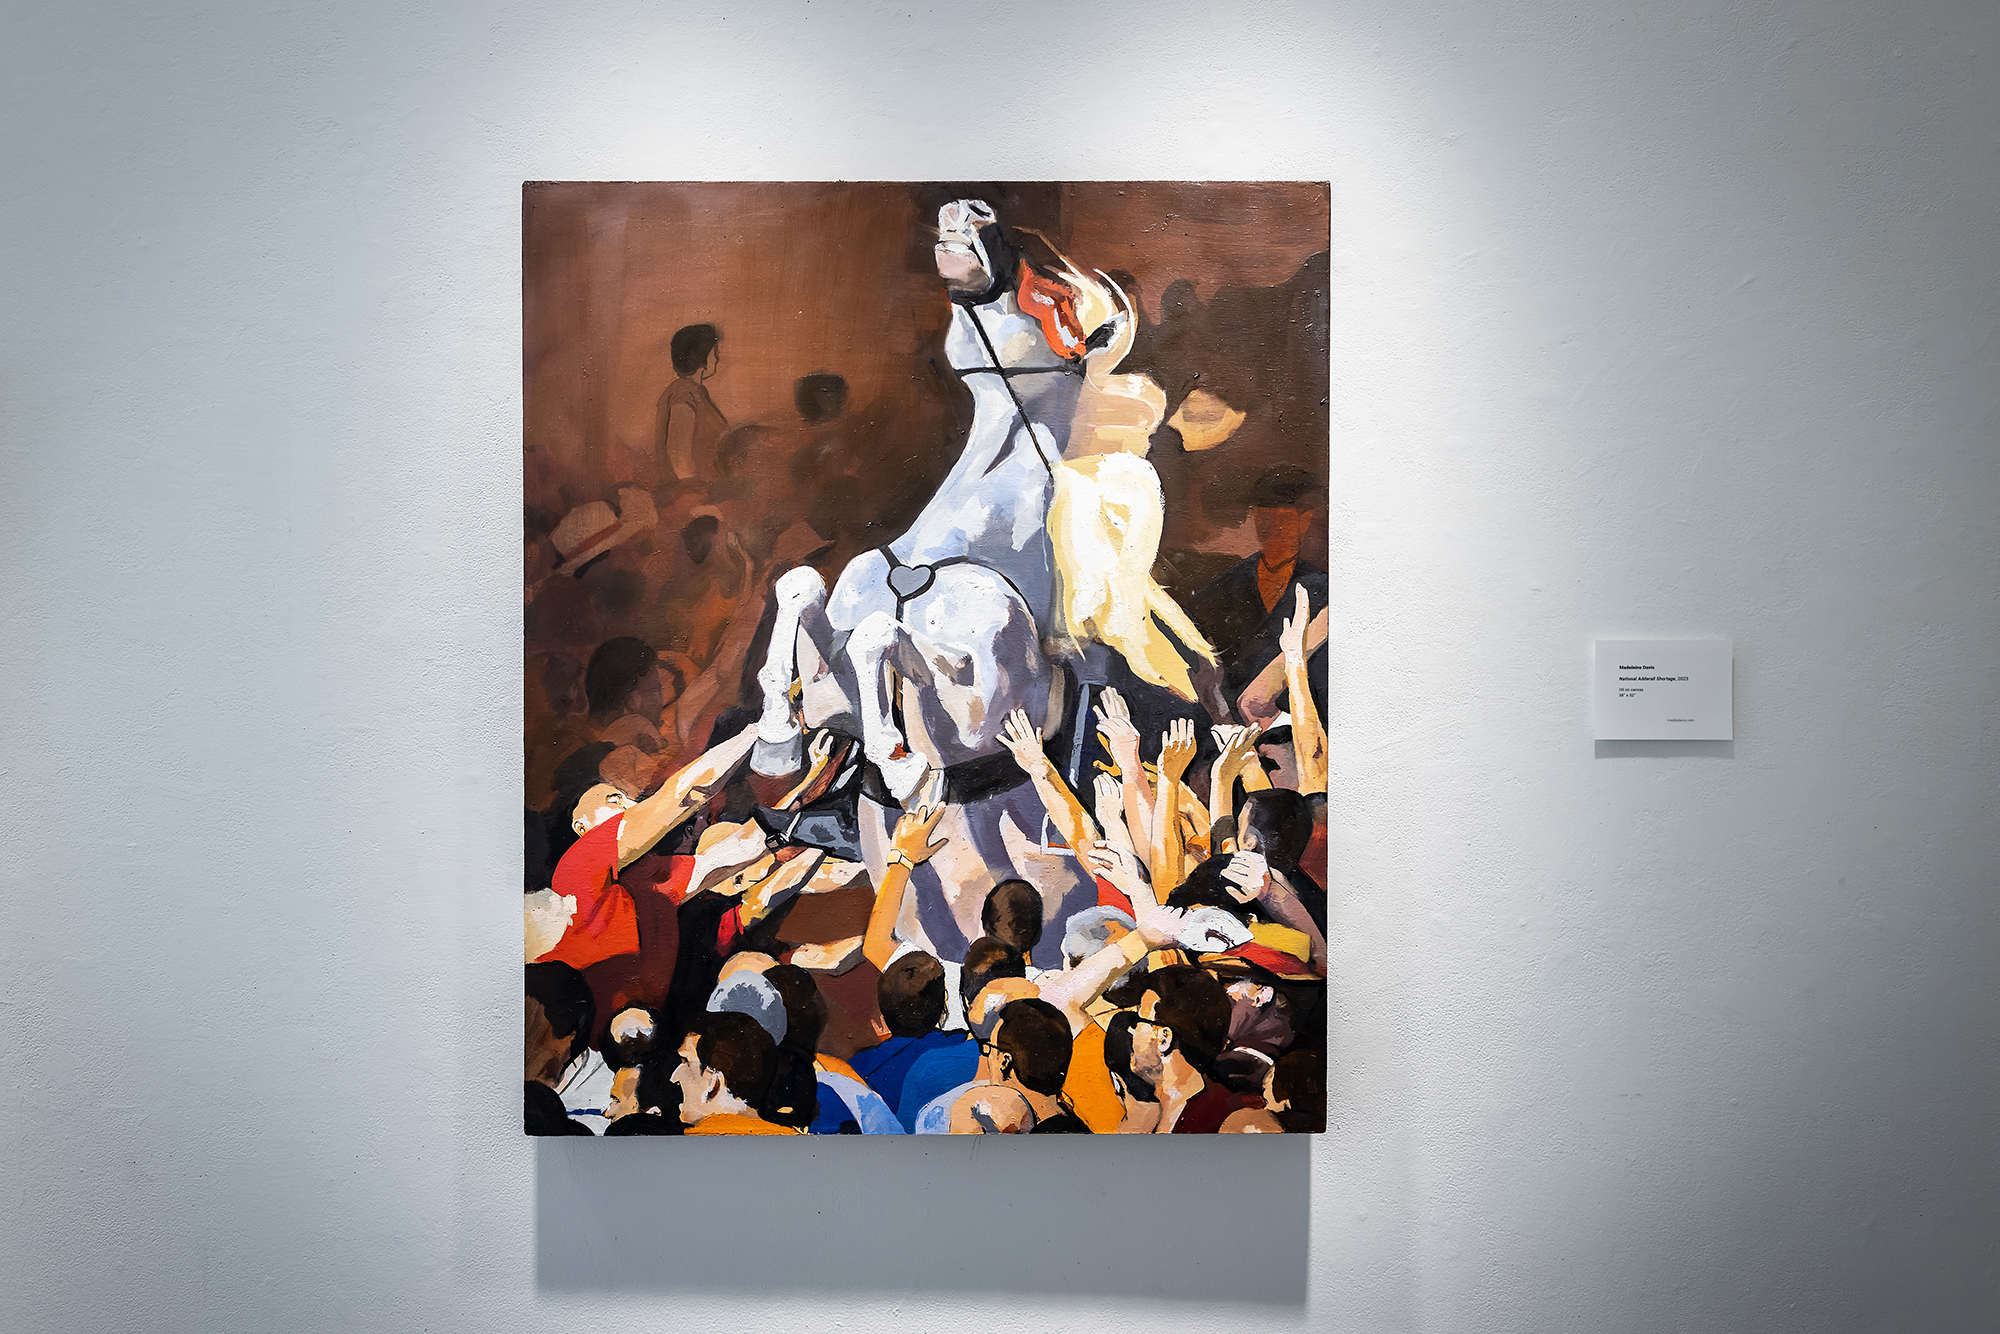 artwork depicting rearing horse with crowd below with upstretched arms